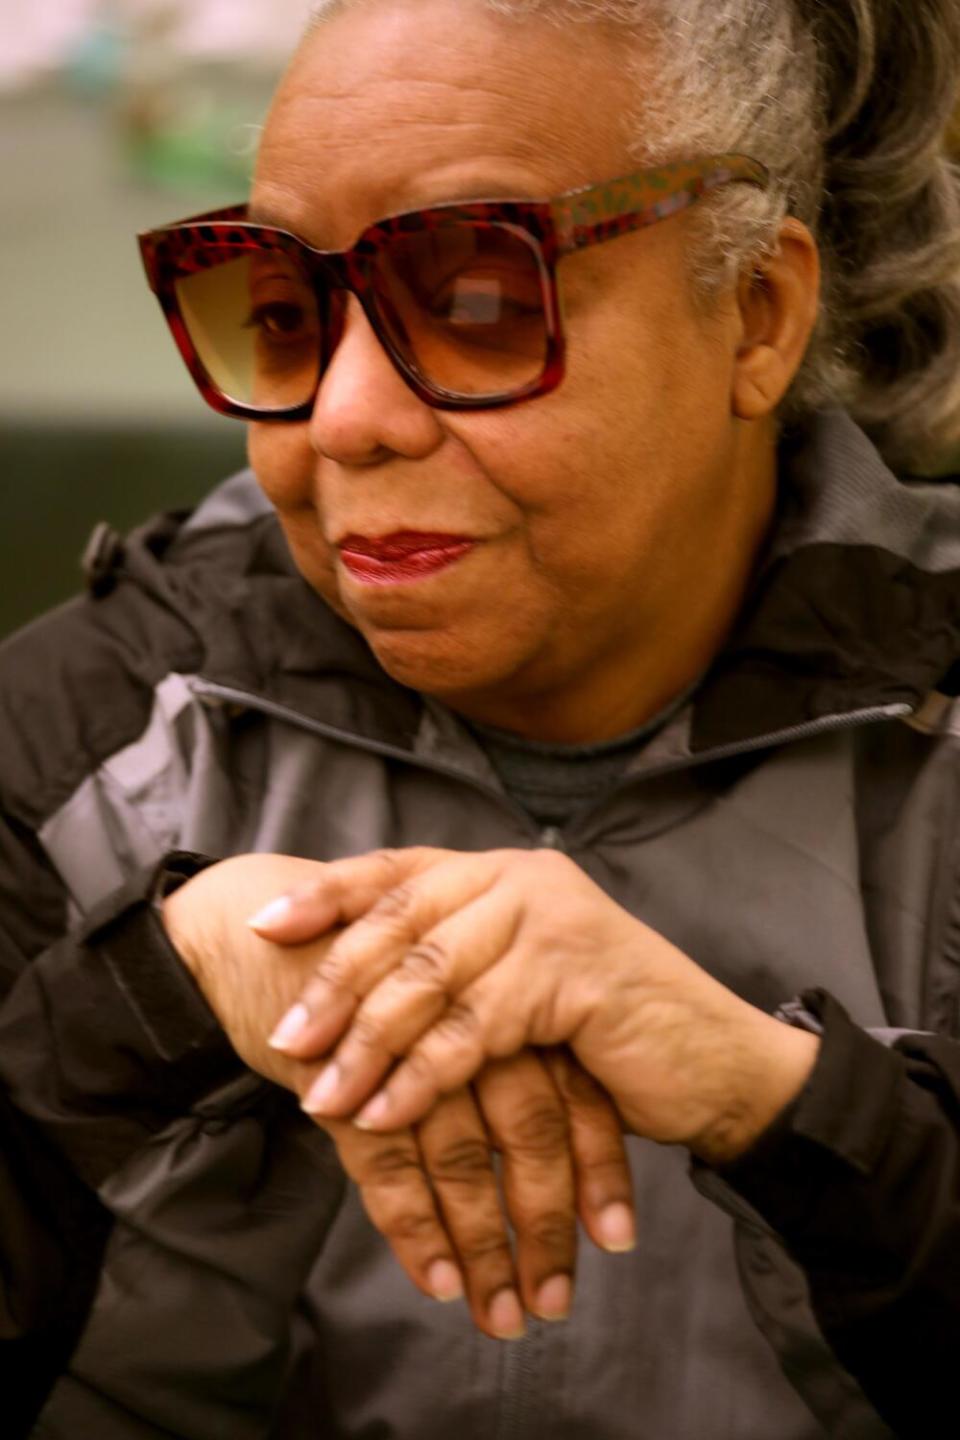 A woman in large sunglasses sits with her hands clasped in front of her